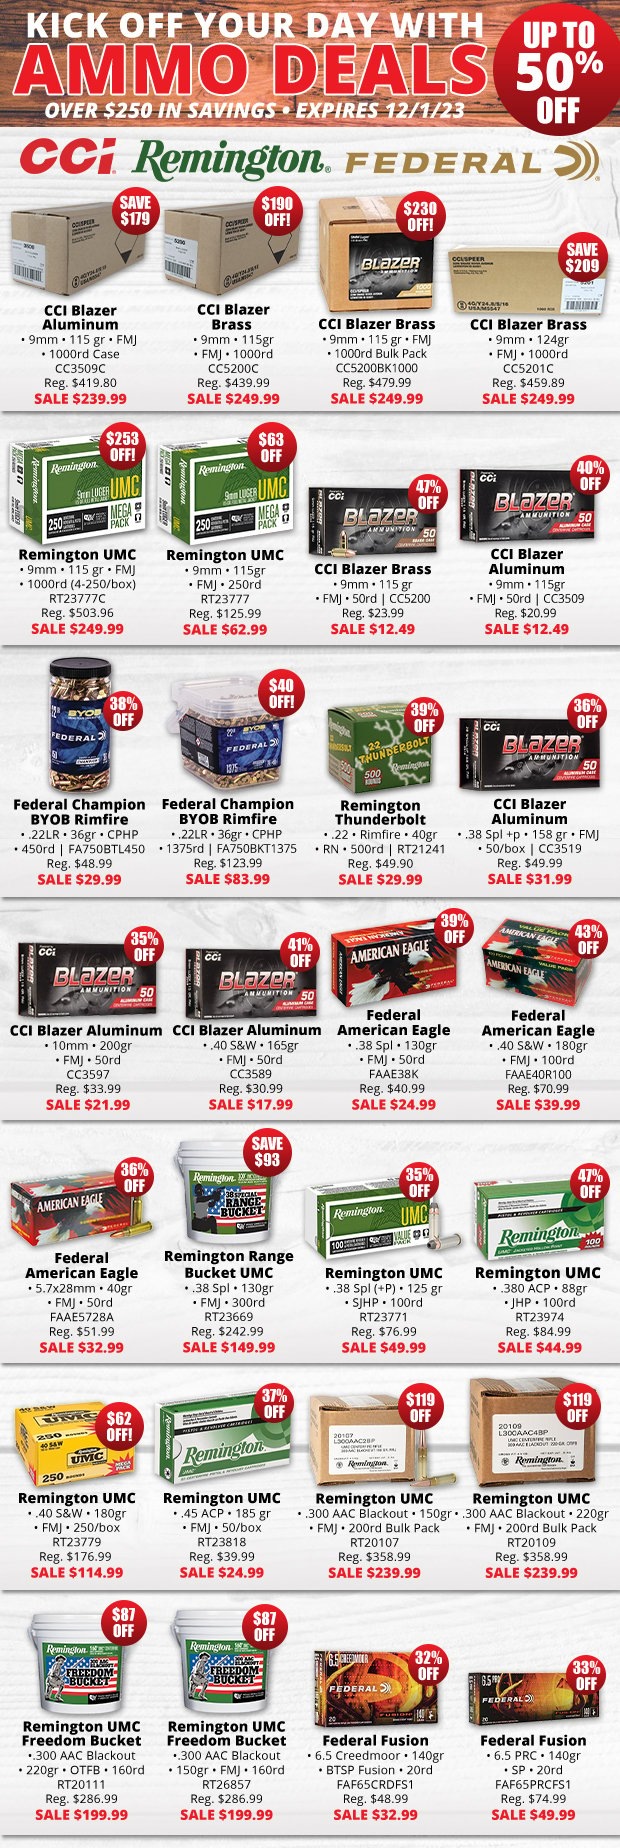 Up to 50% Off Top Ammo